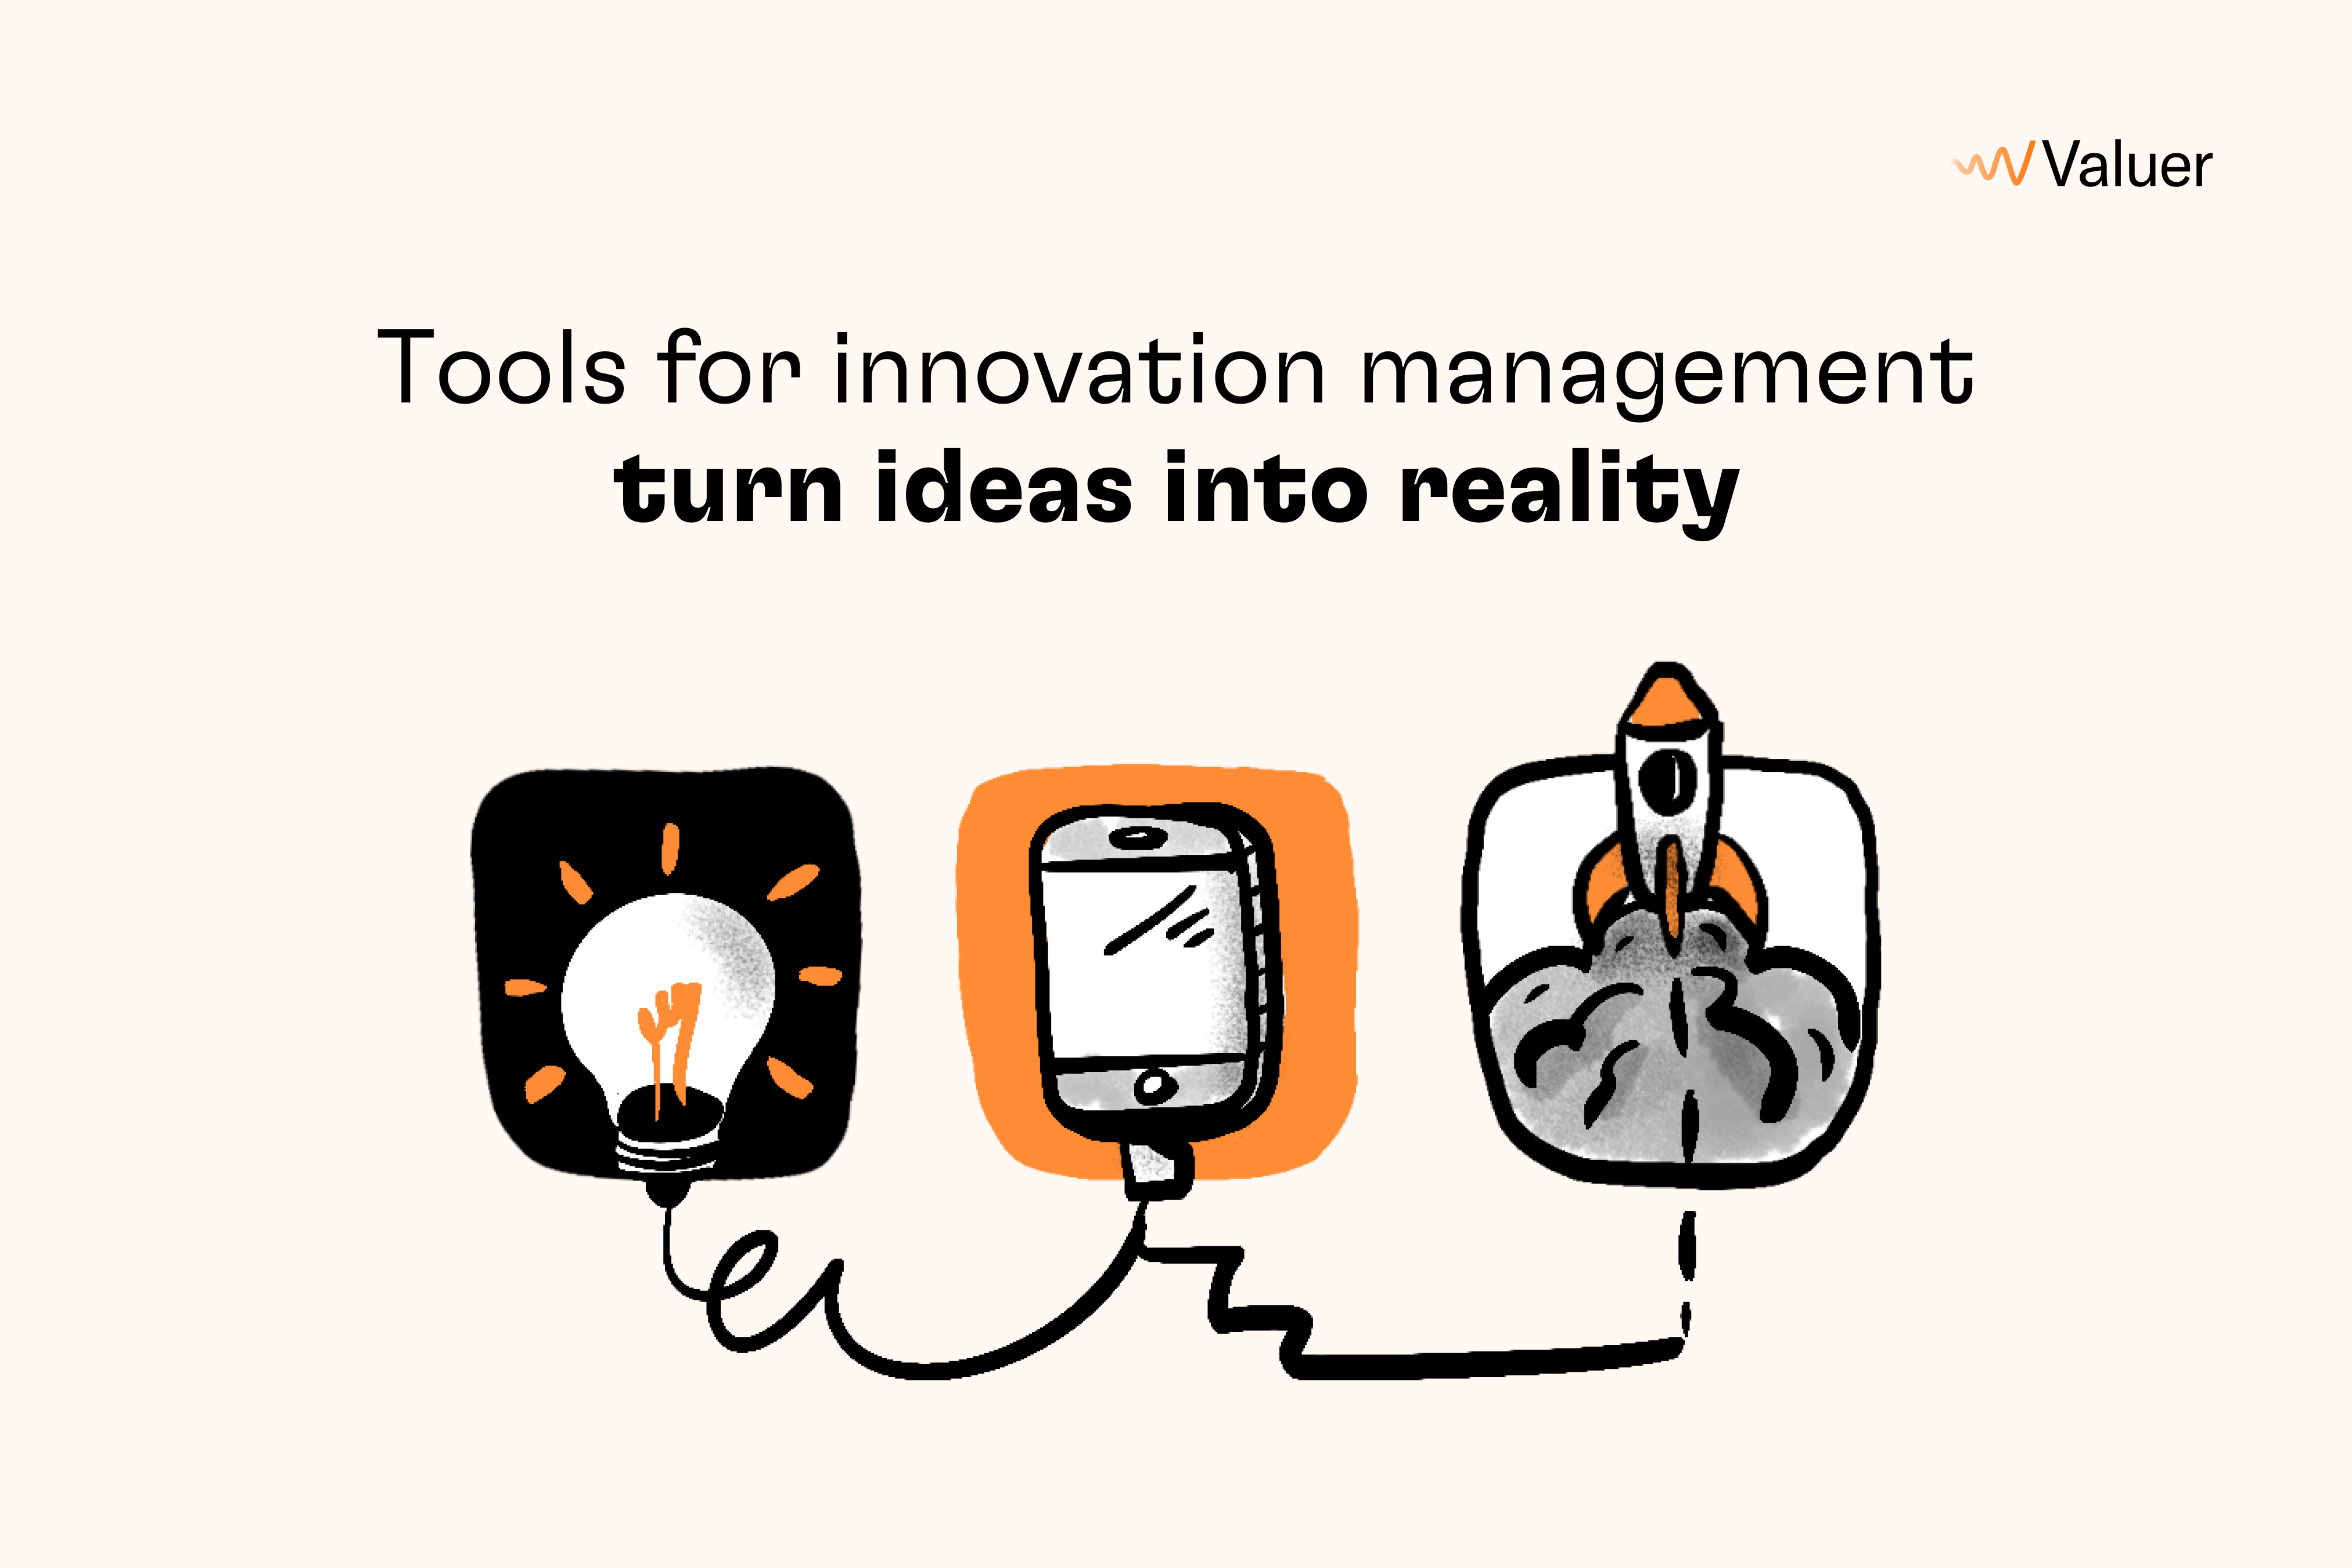 Tools for innovation management turn ideas into reality